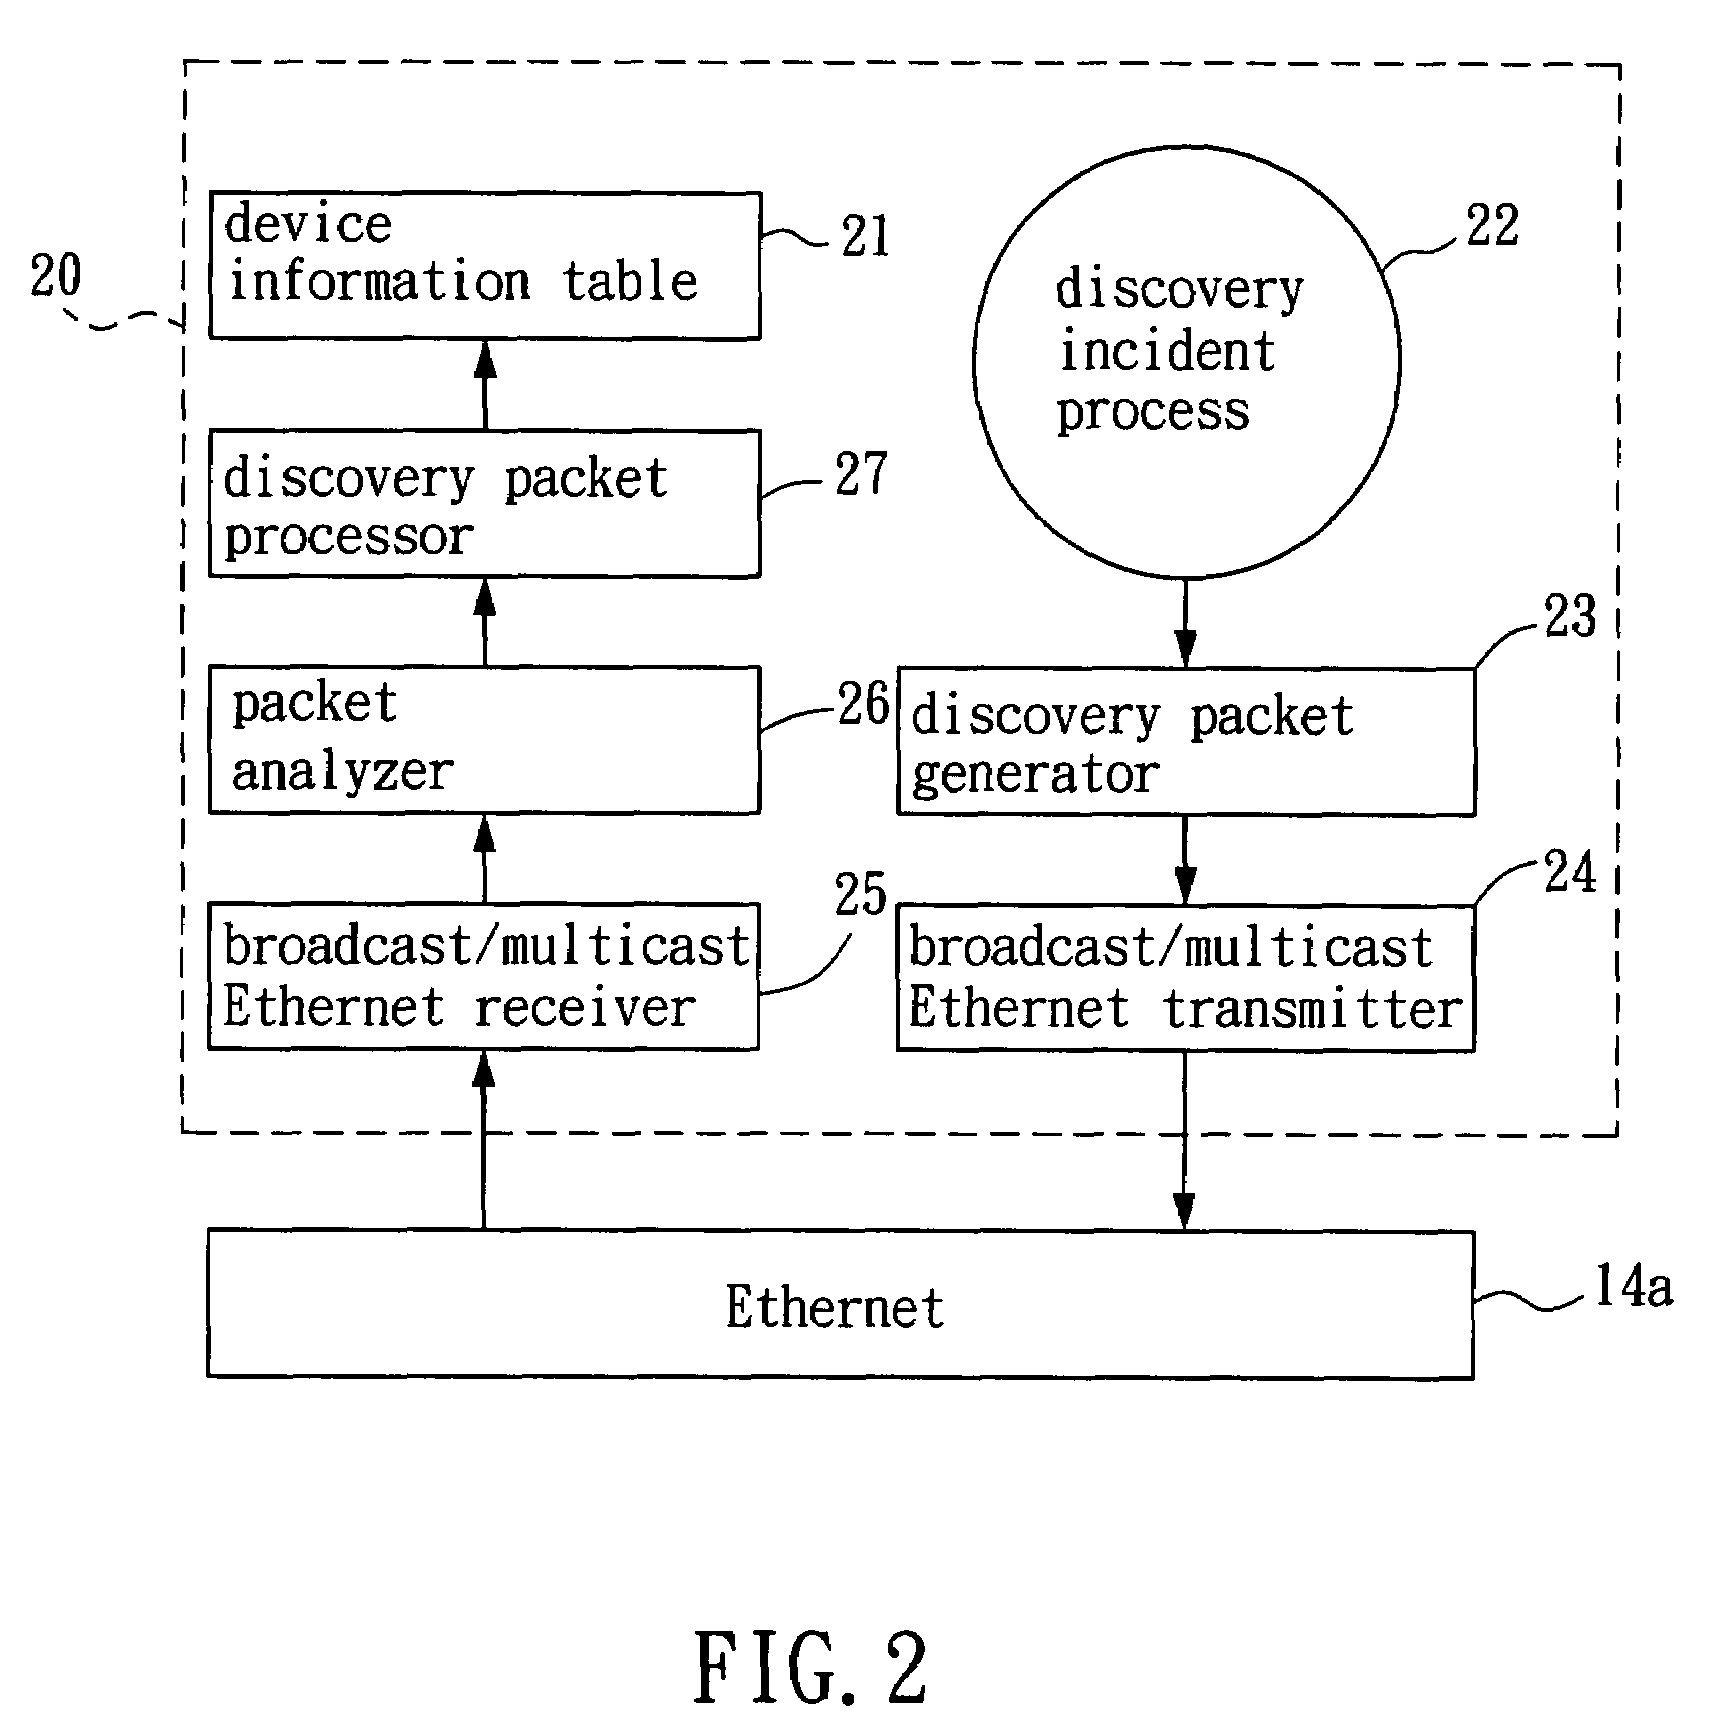 Method for discovering network device